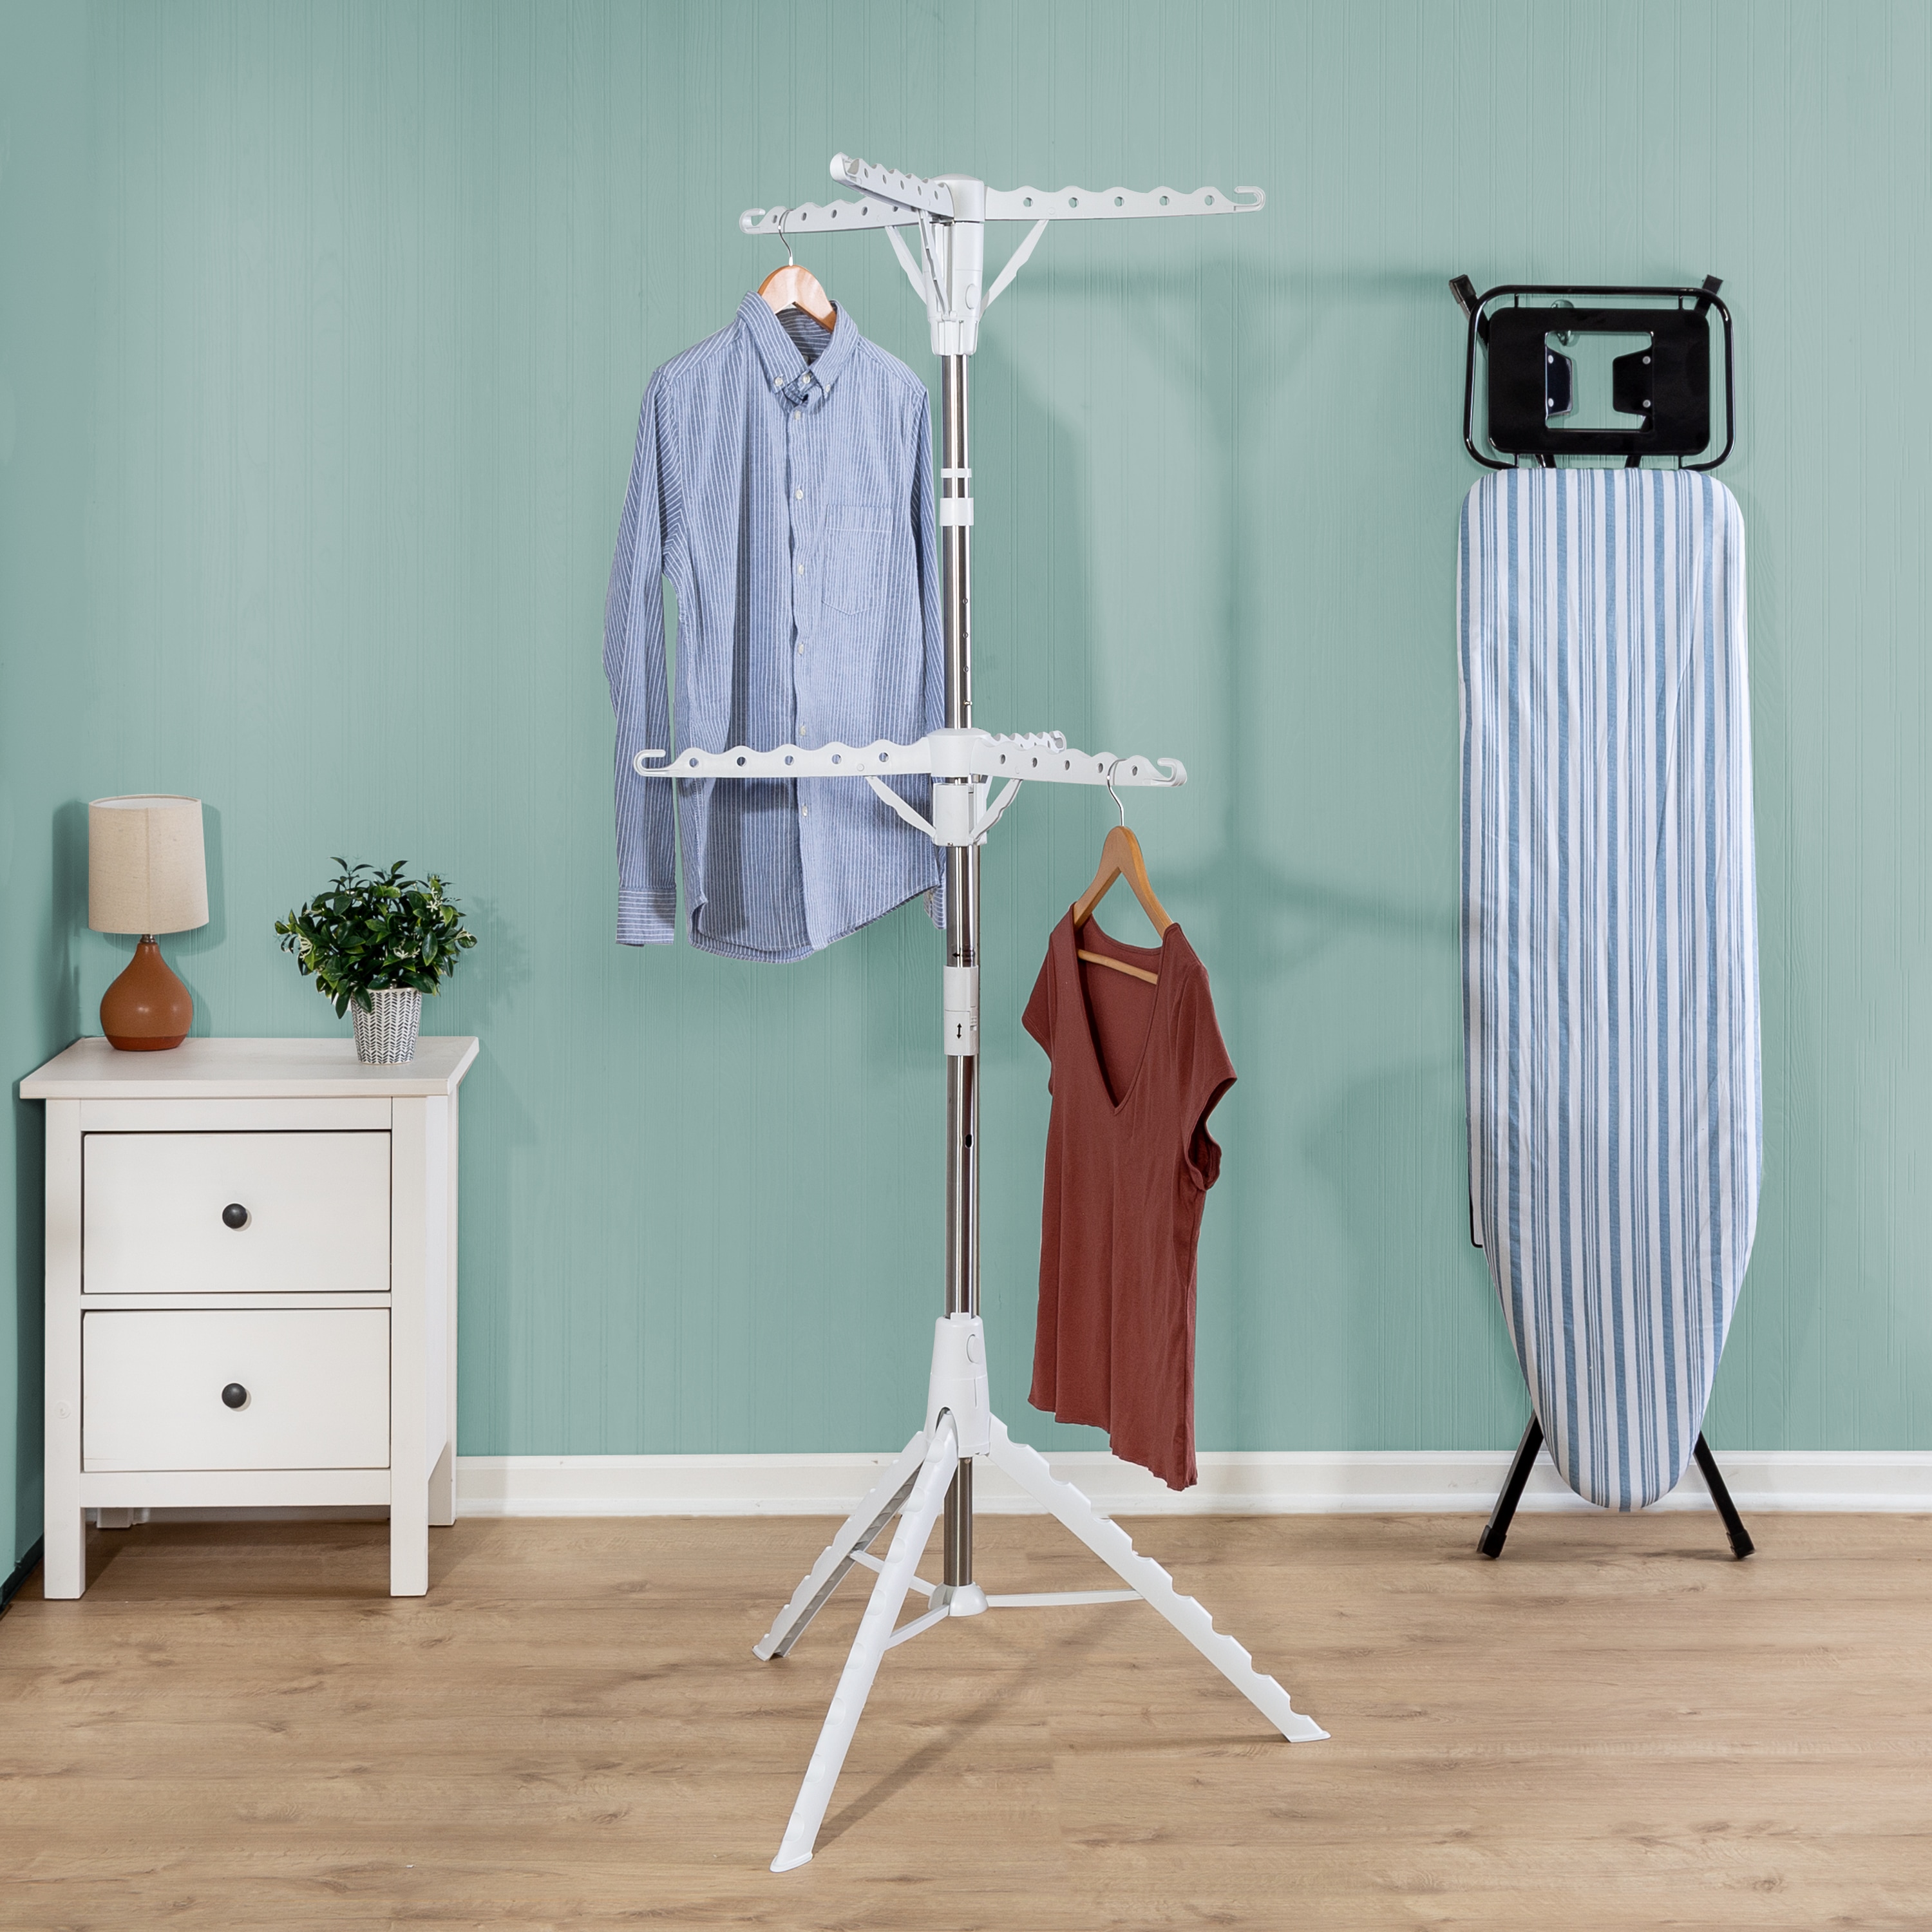 Honey-Can-Do Collapsible Steel Freestanding Tripod Clothes Drying Rack,  Chrome/Blue